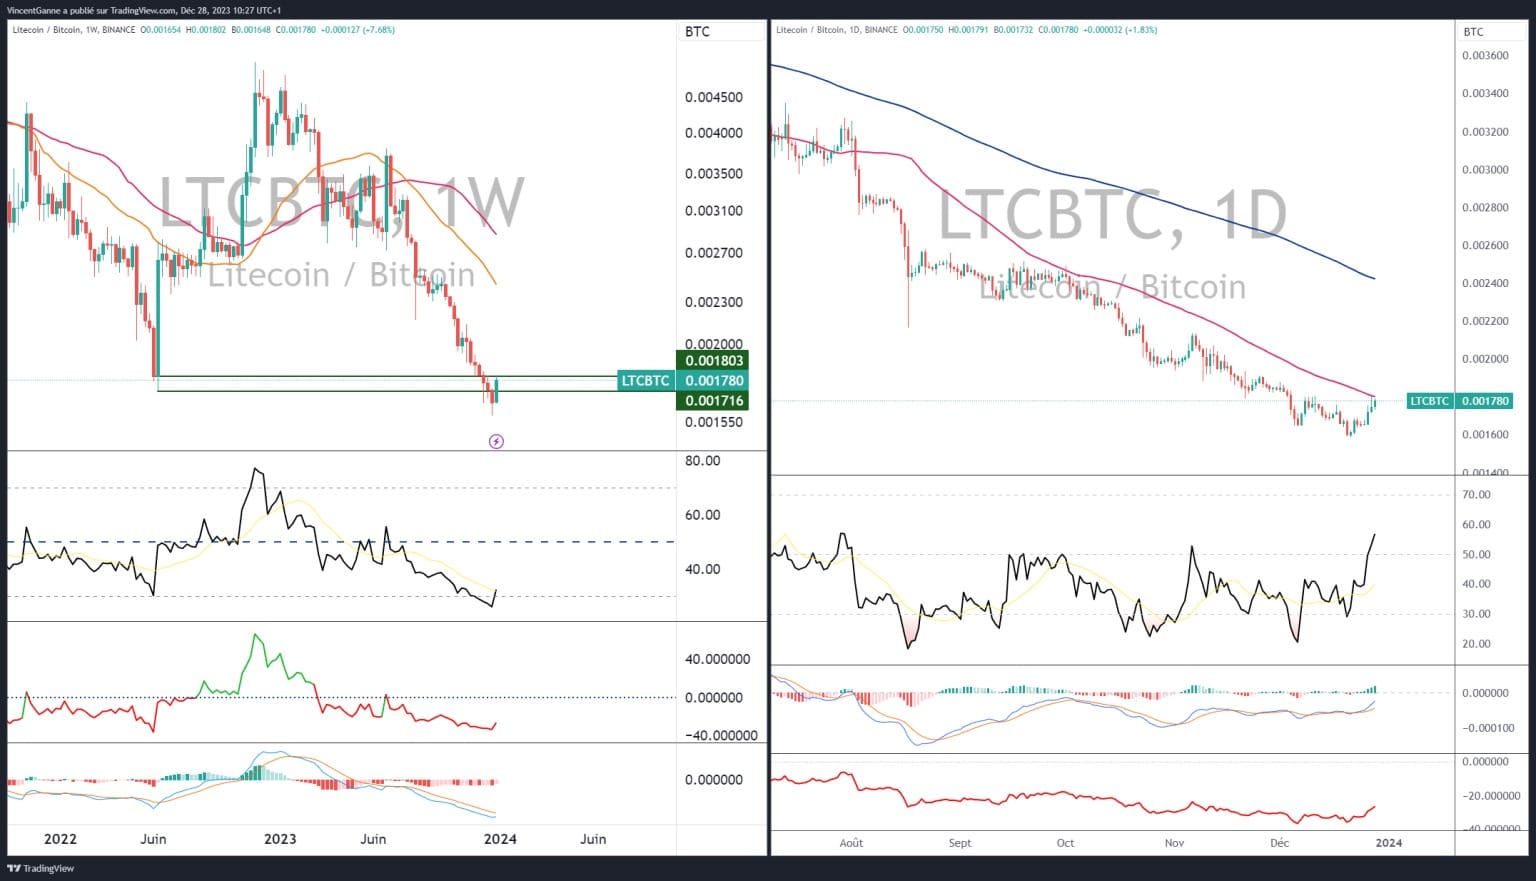 Chart showing weekly and daily Japanese candlesticks for the LTC/BTC pair